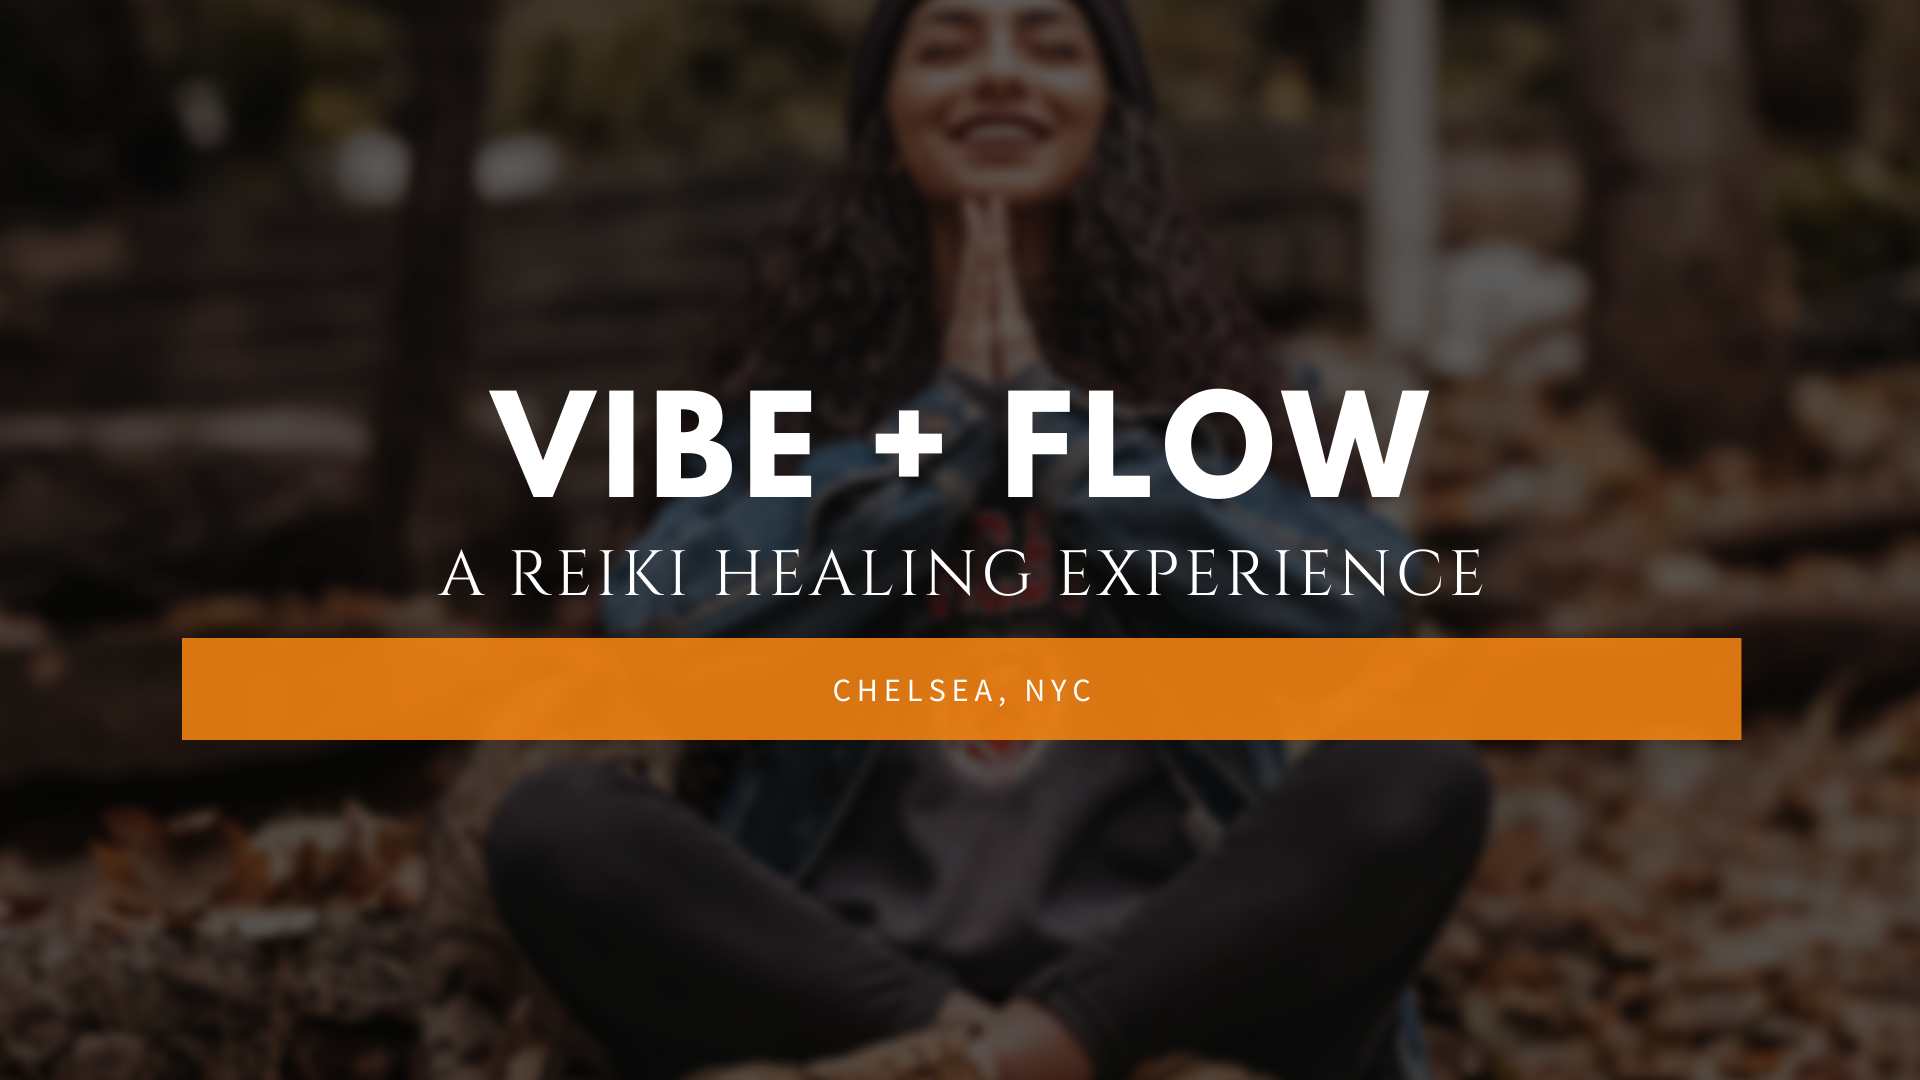 Vibe + Flow // A Reiki Healing Experience